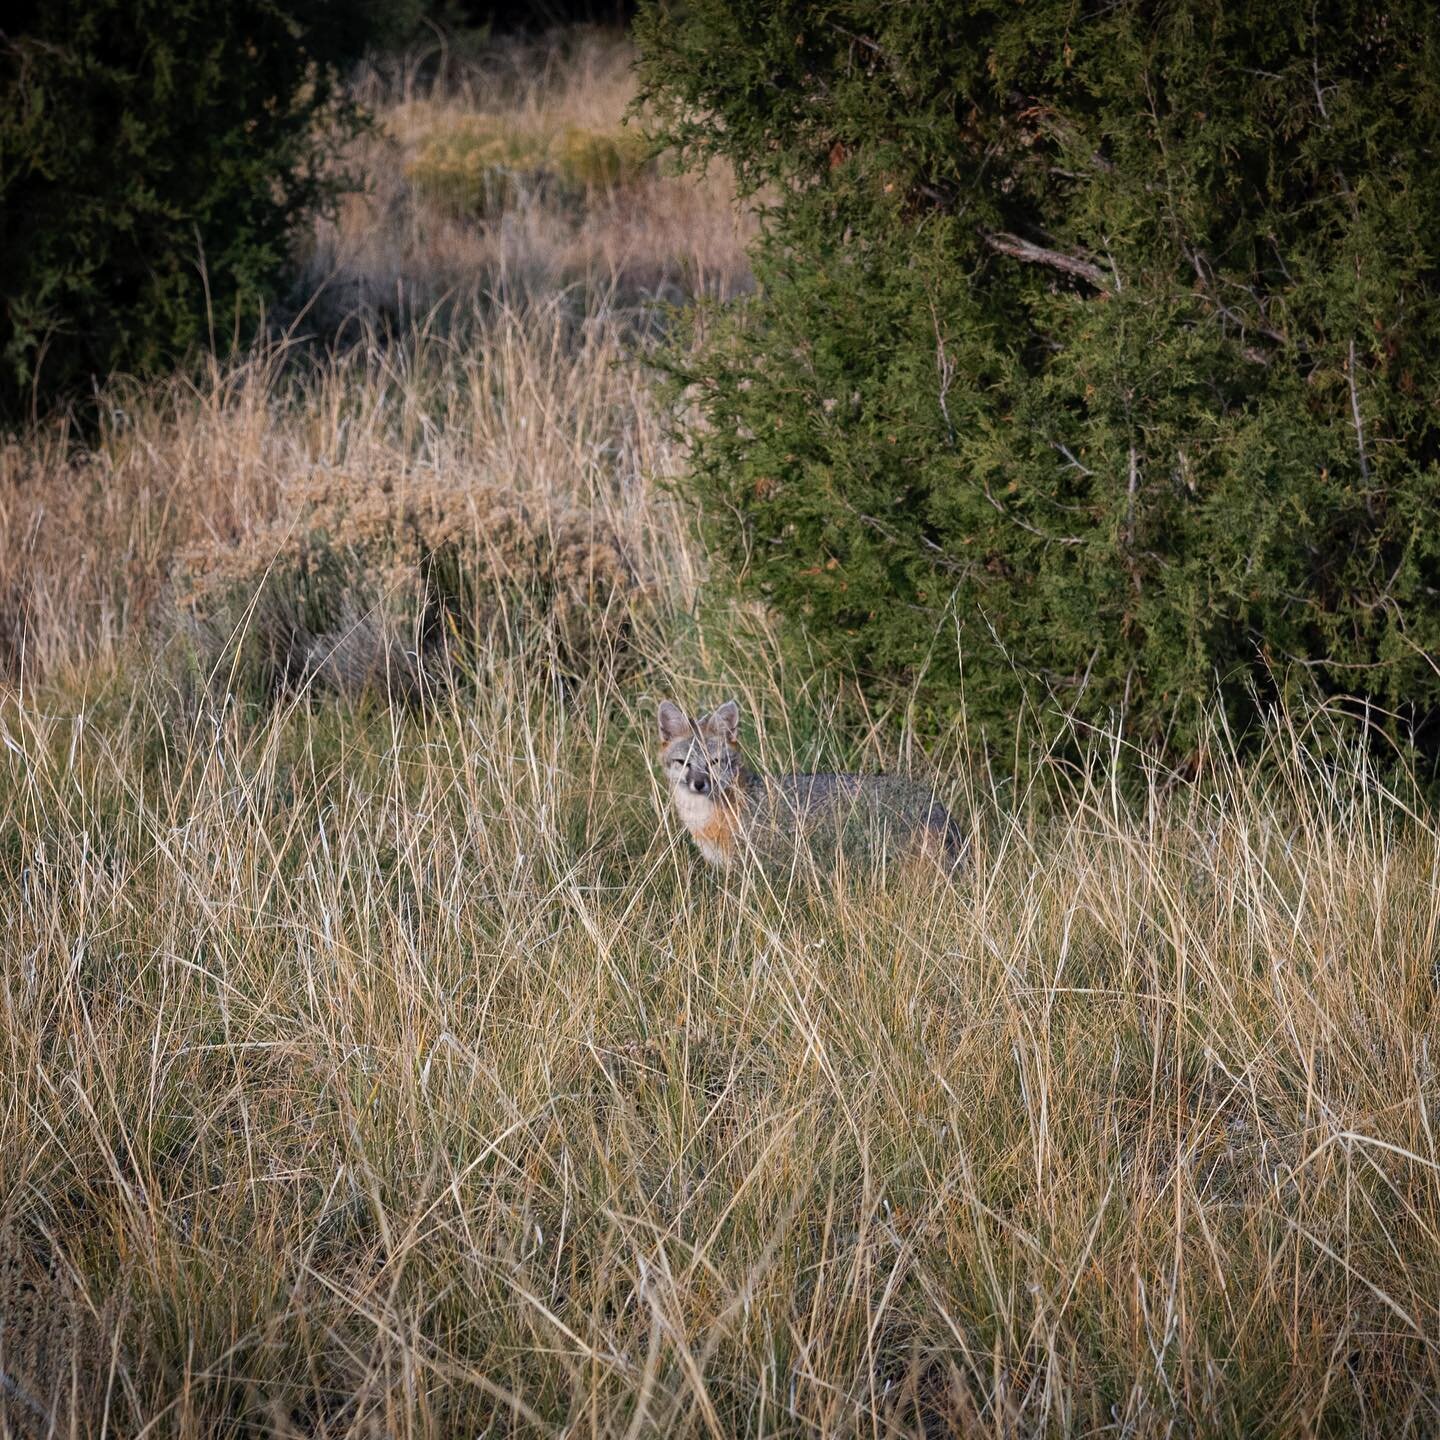 A curious and friendly gray fox welcomes us to our cabin just below the Sangre de Cristo Mountains and above the San Luis Valley.

#colorado #grayfox #sangredecristomountains #sanluisvalley #wildlife #wildlifephotography